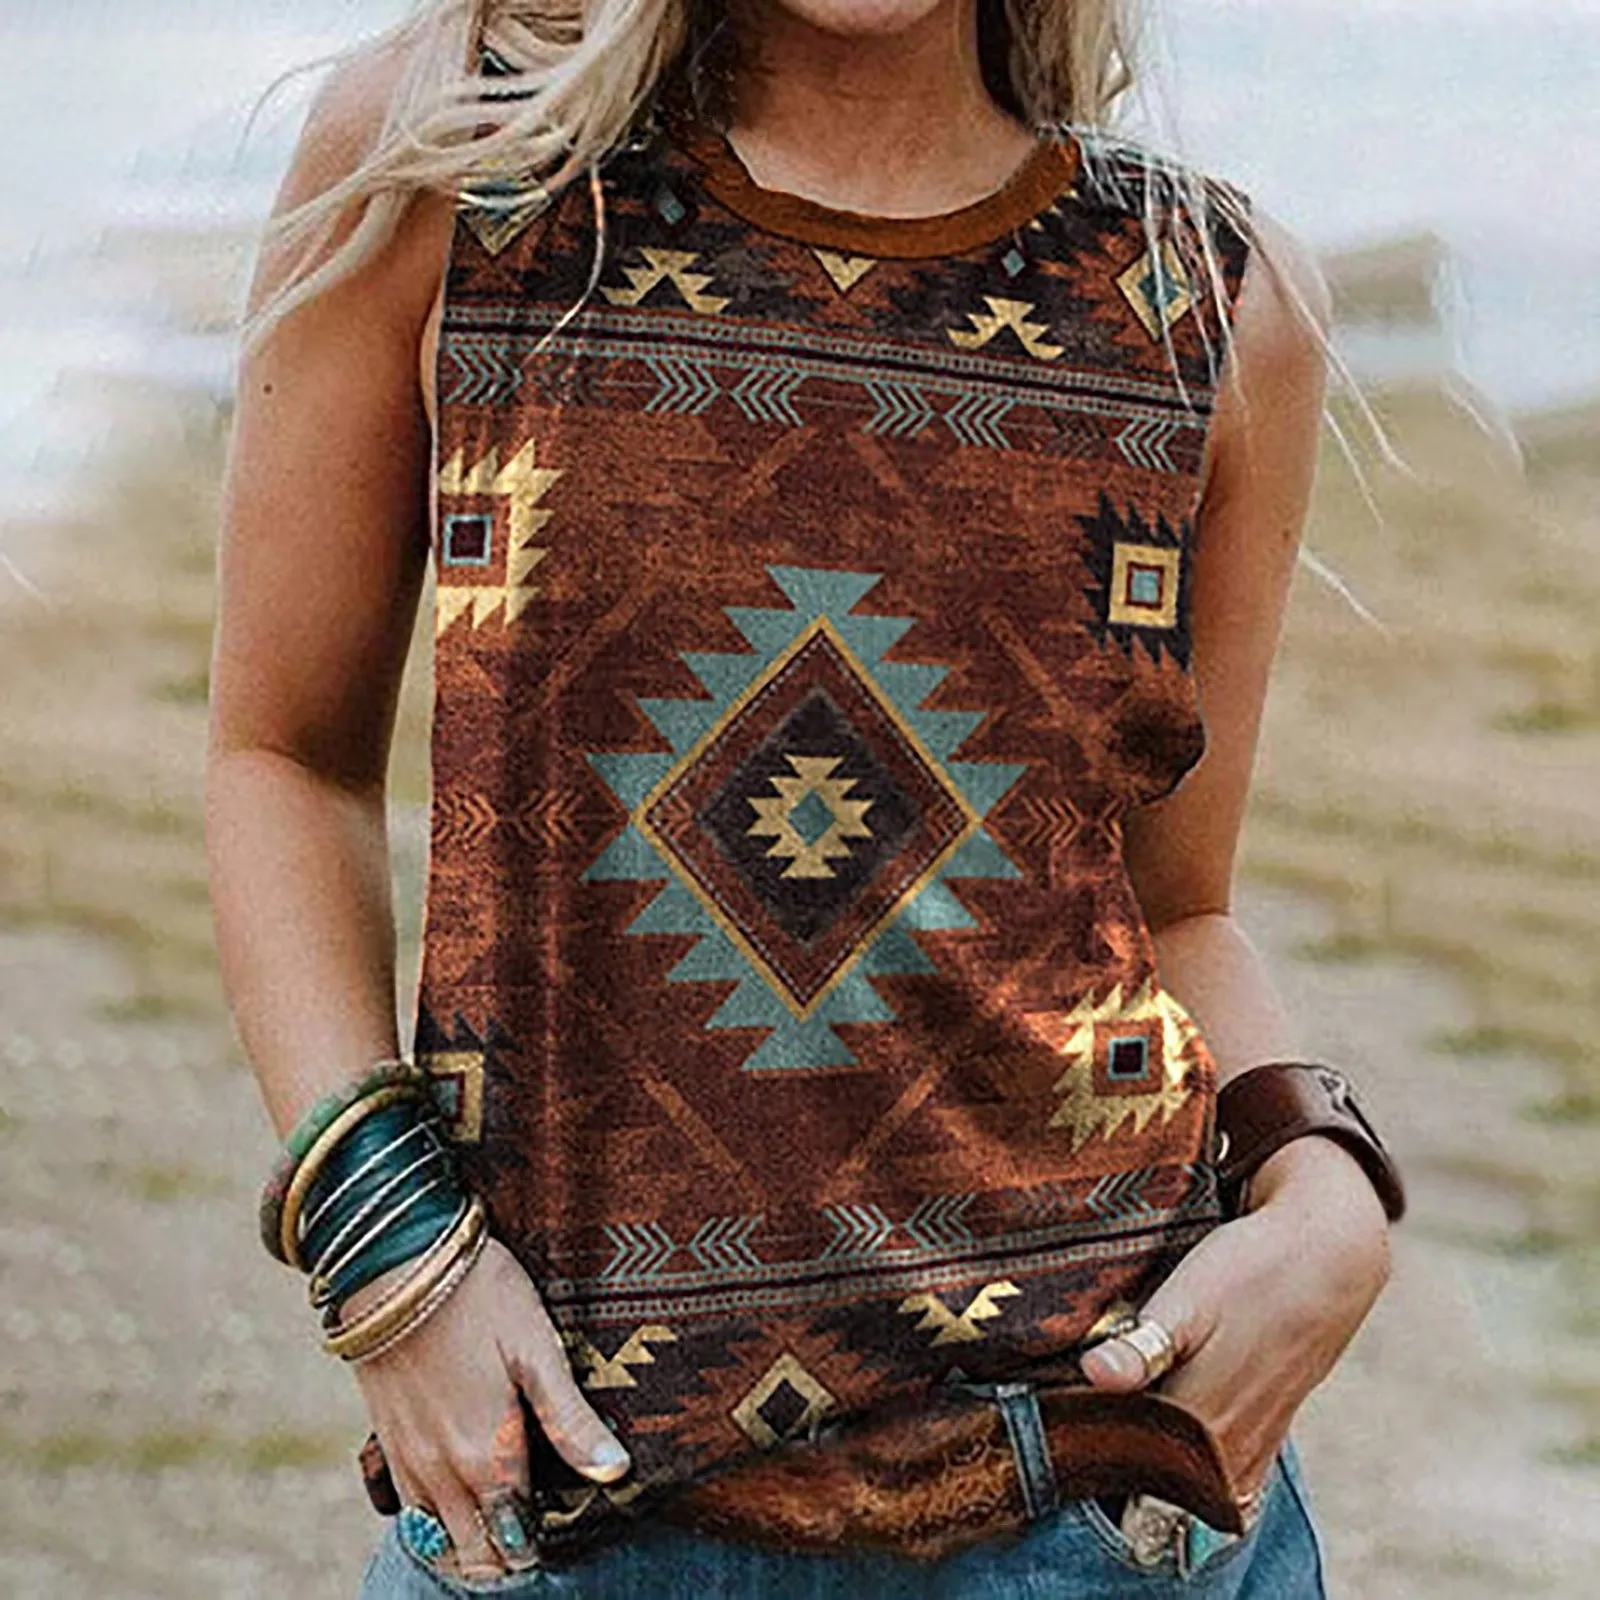 

Women's Aztec Tanks Sexy Sleeveless Shirt Vintage Tee O-neck Vest Summer Shirts Tops For Women Nordic Retro Blouse Pulovers Tops